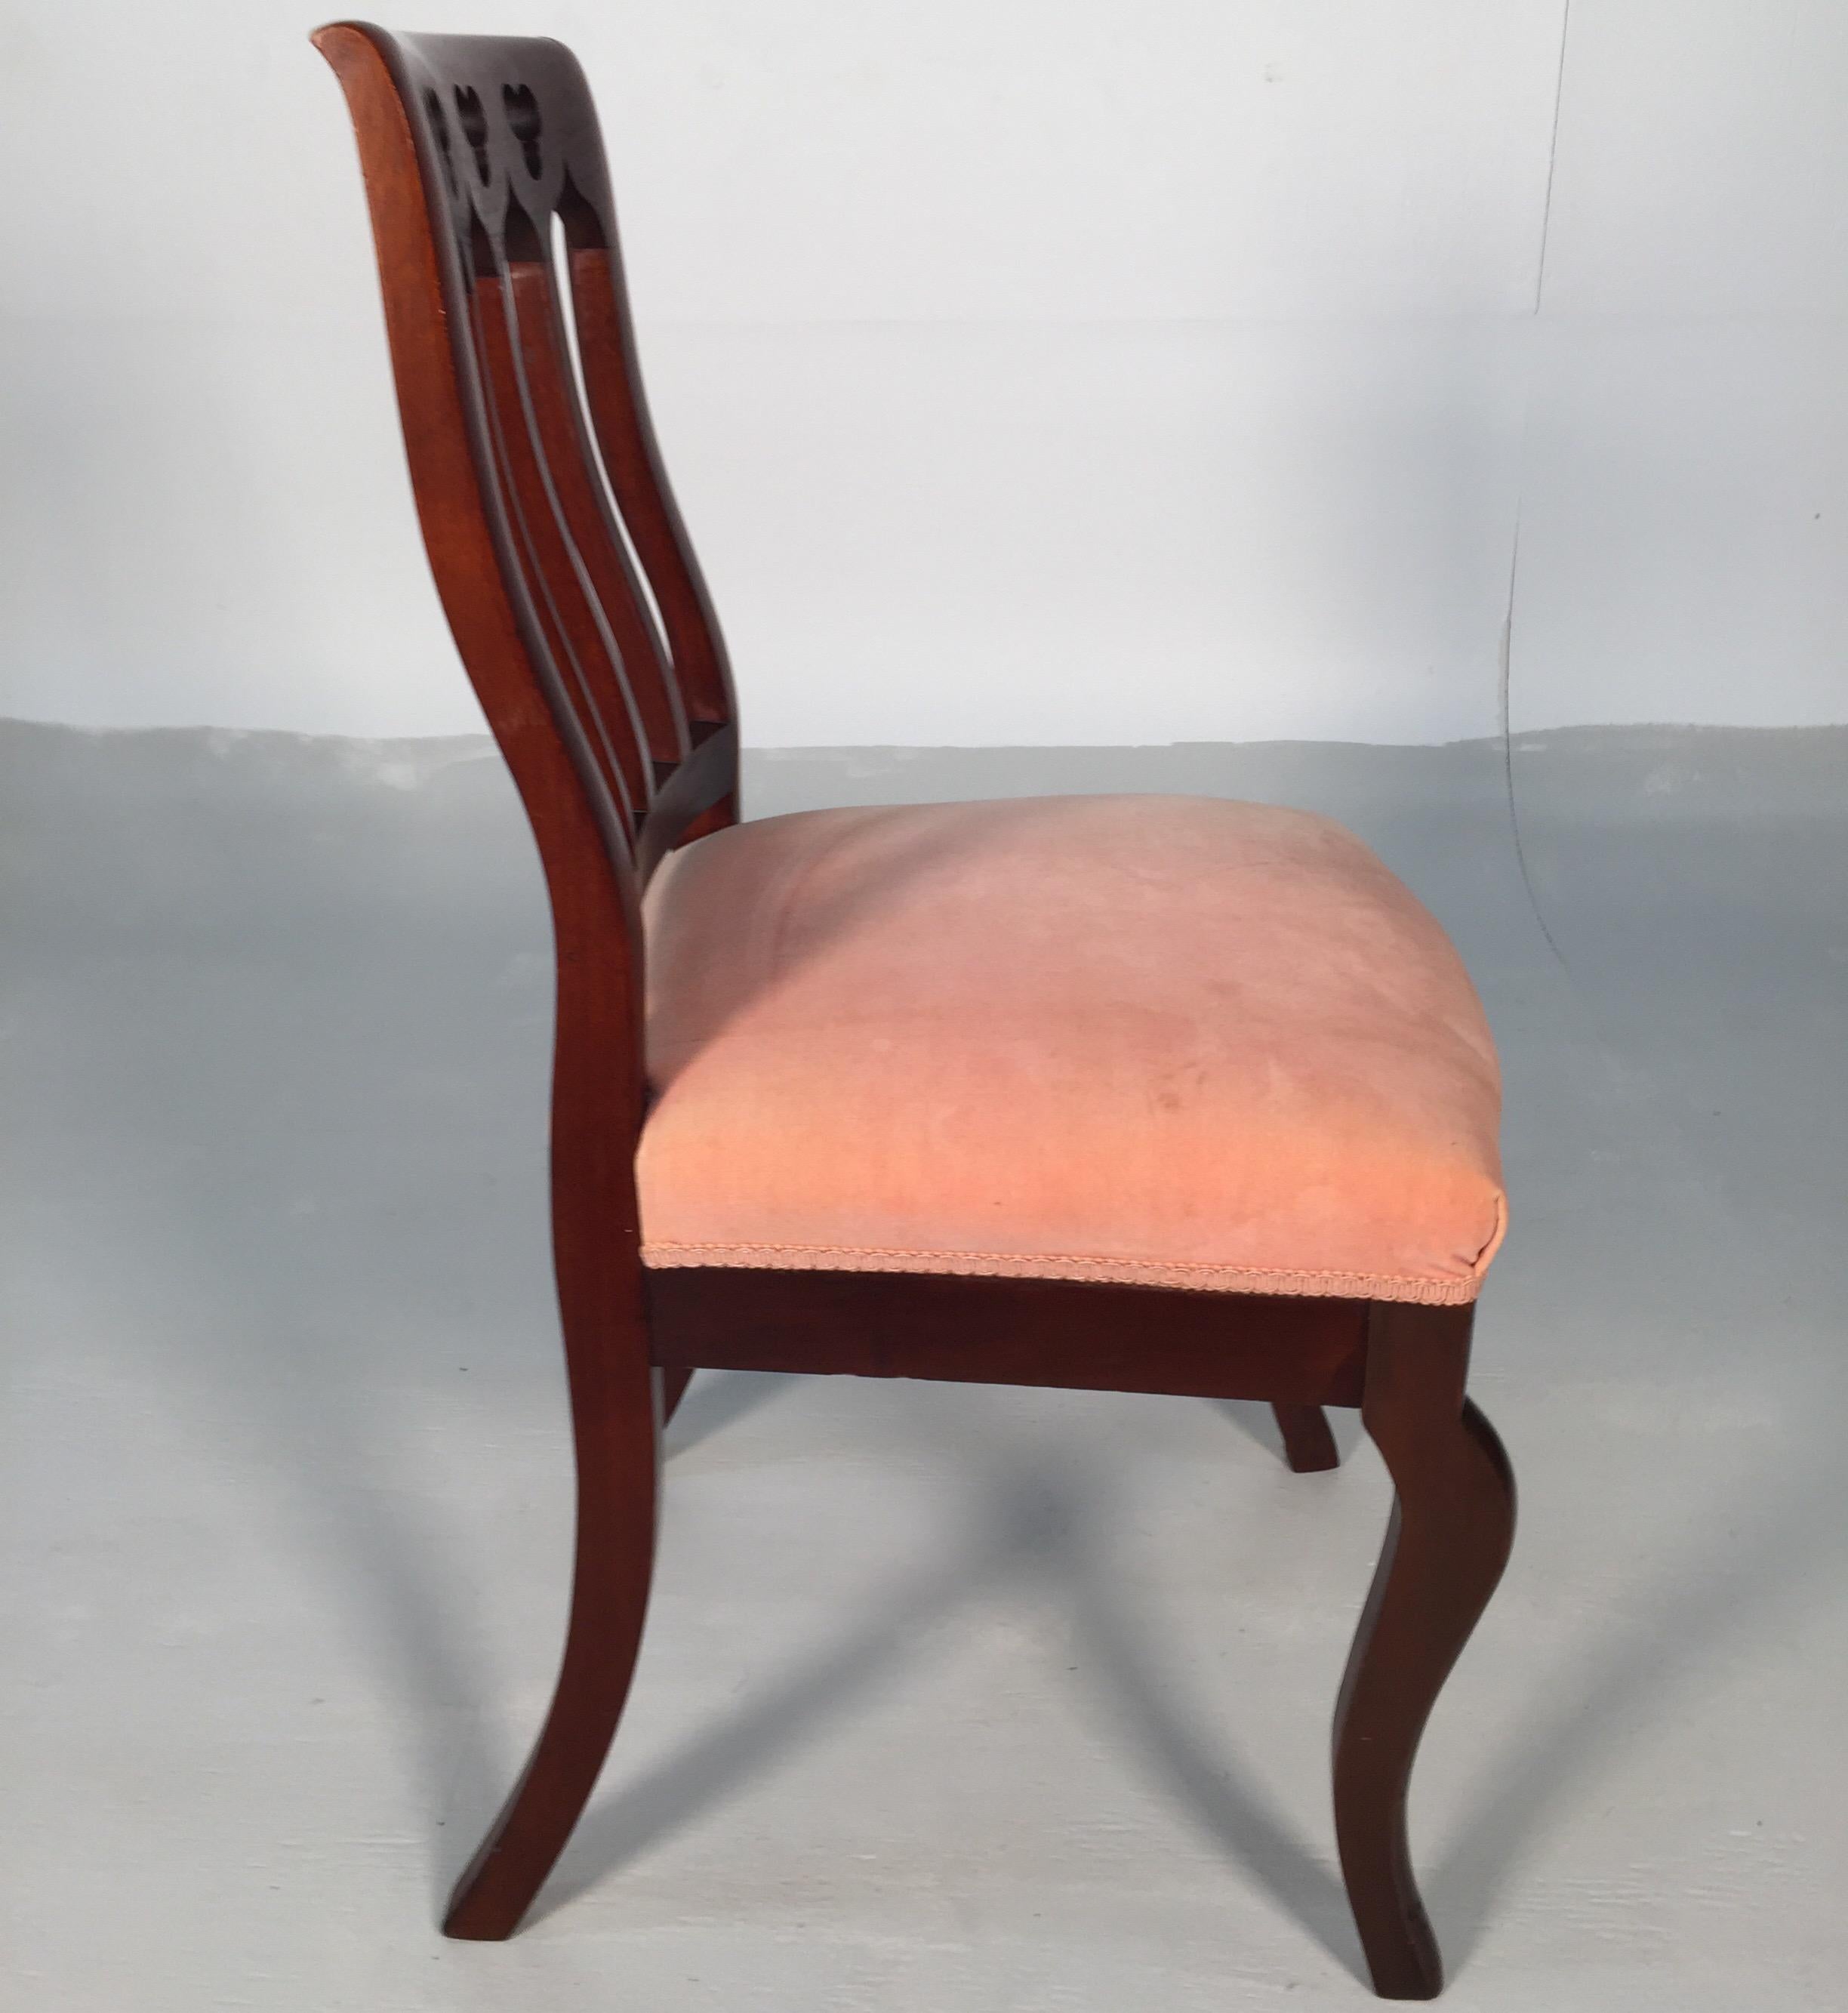 Set of 10, circa 1850s Gothic Revival Upholstered Dining Chairs, by John Jelliff 1